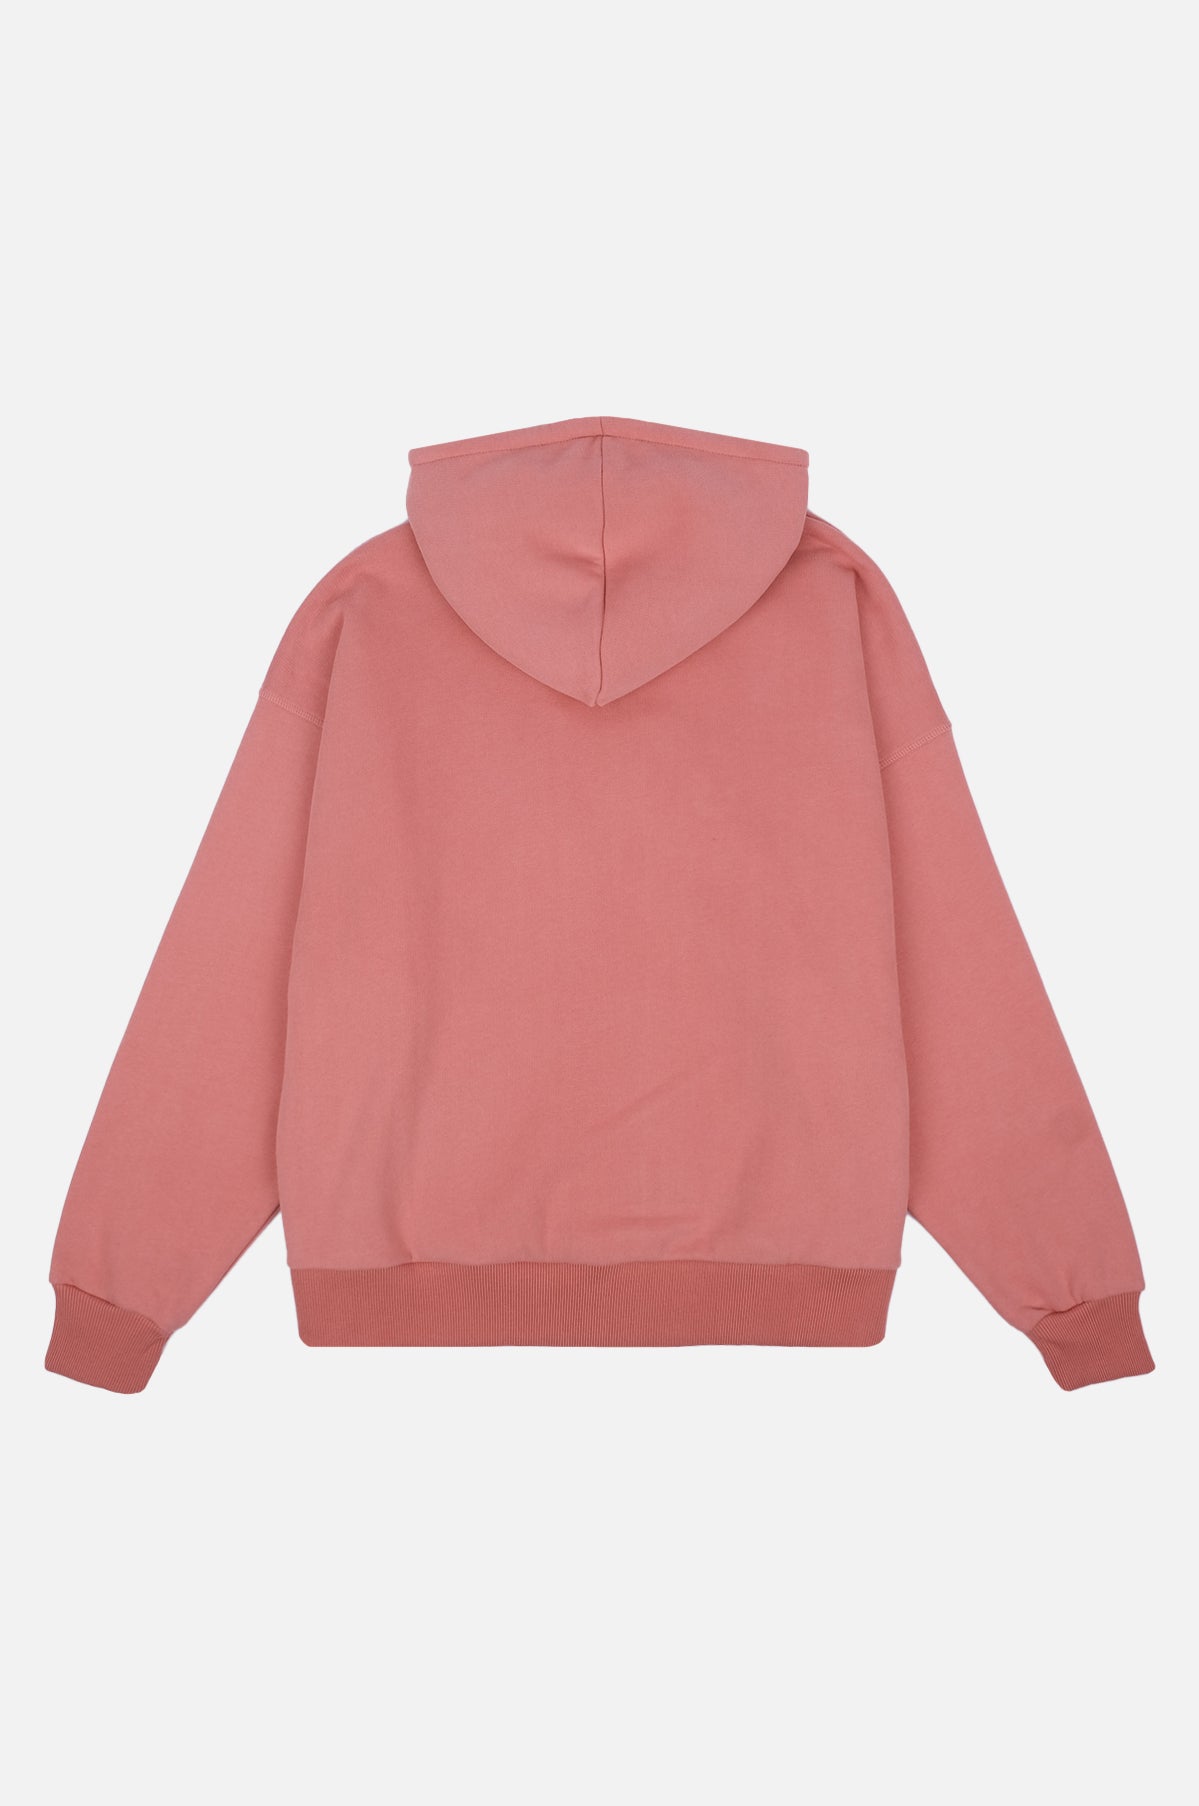 Sudadera Capucha Cremallera Mujer Oversized Orgánica Esencial Rossette Pink